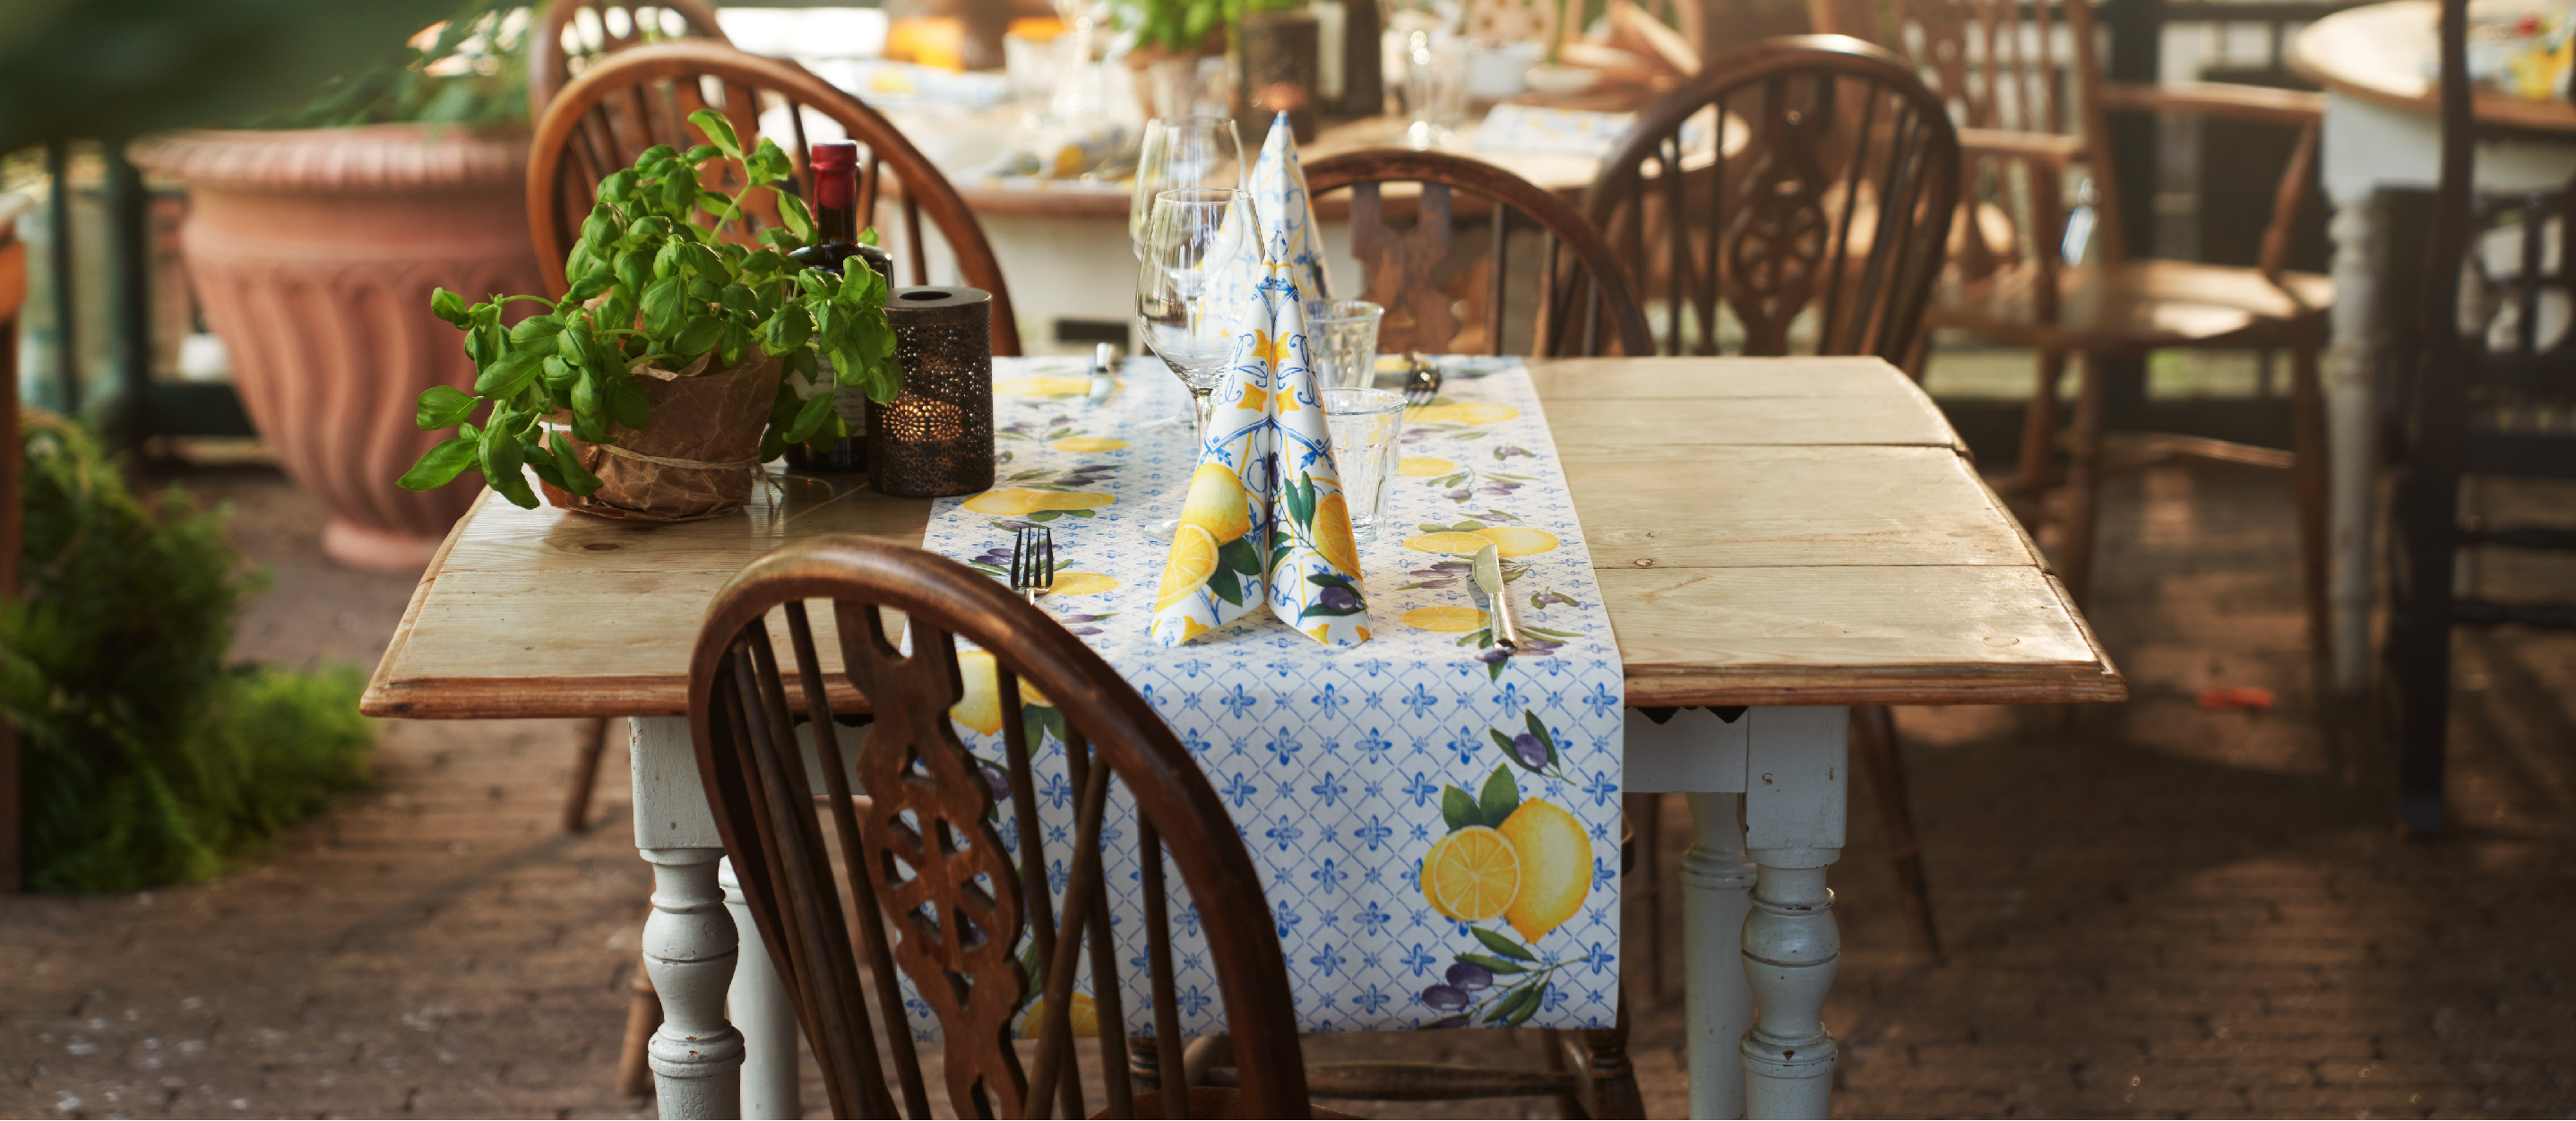 A table set with the Mediterrian napkin and table cover